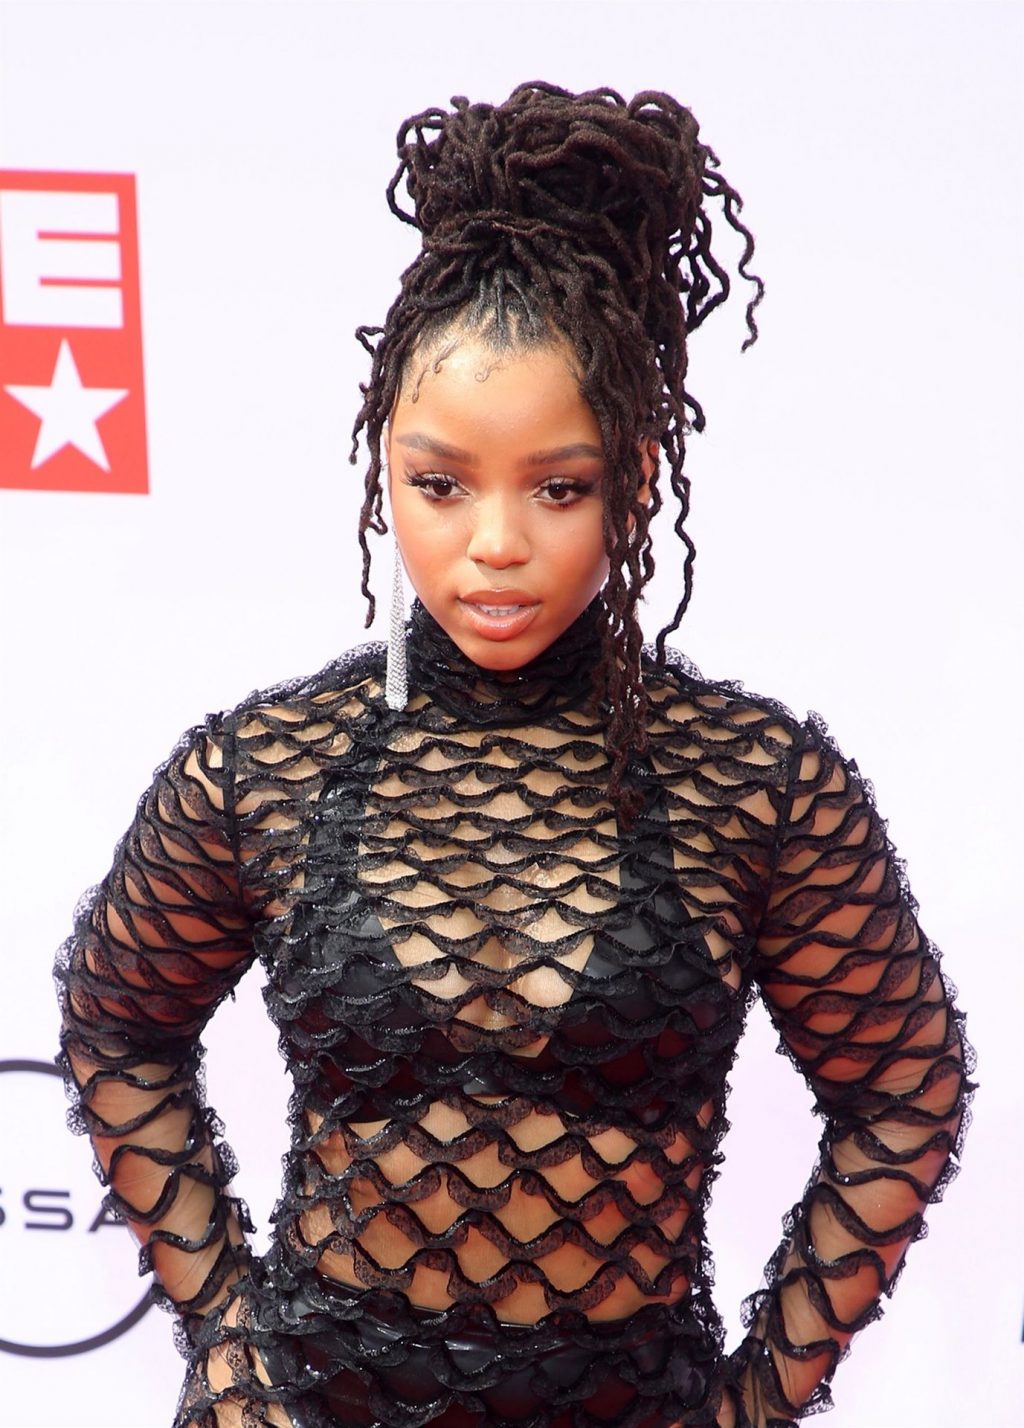 Chloe Bailey Attends The BET Awards in Los Angeles (38 Photos)